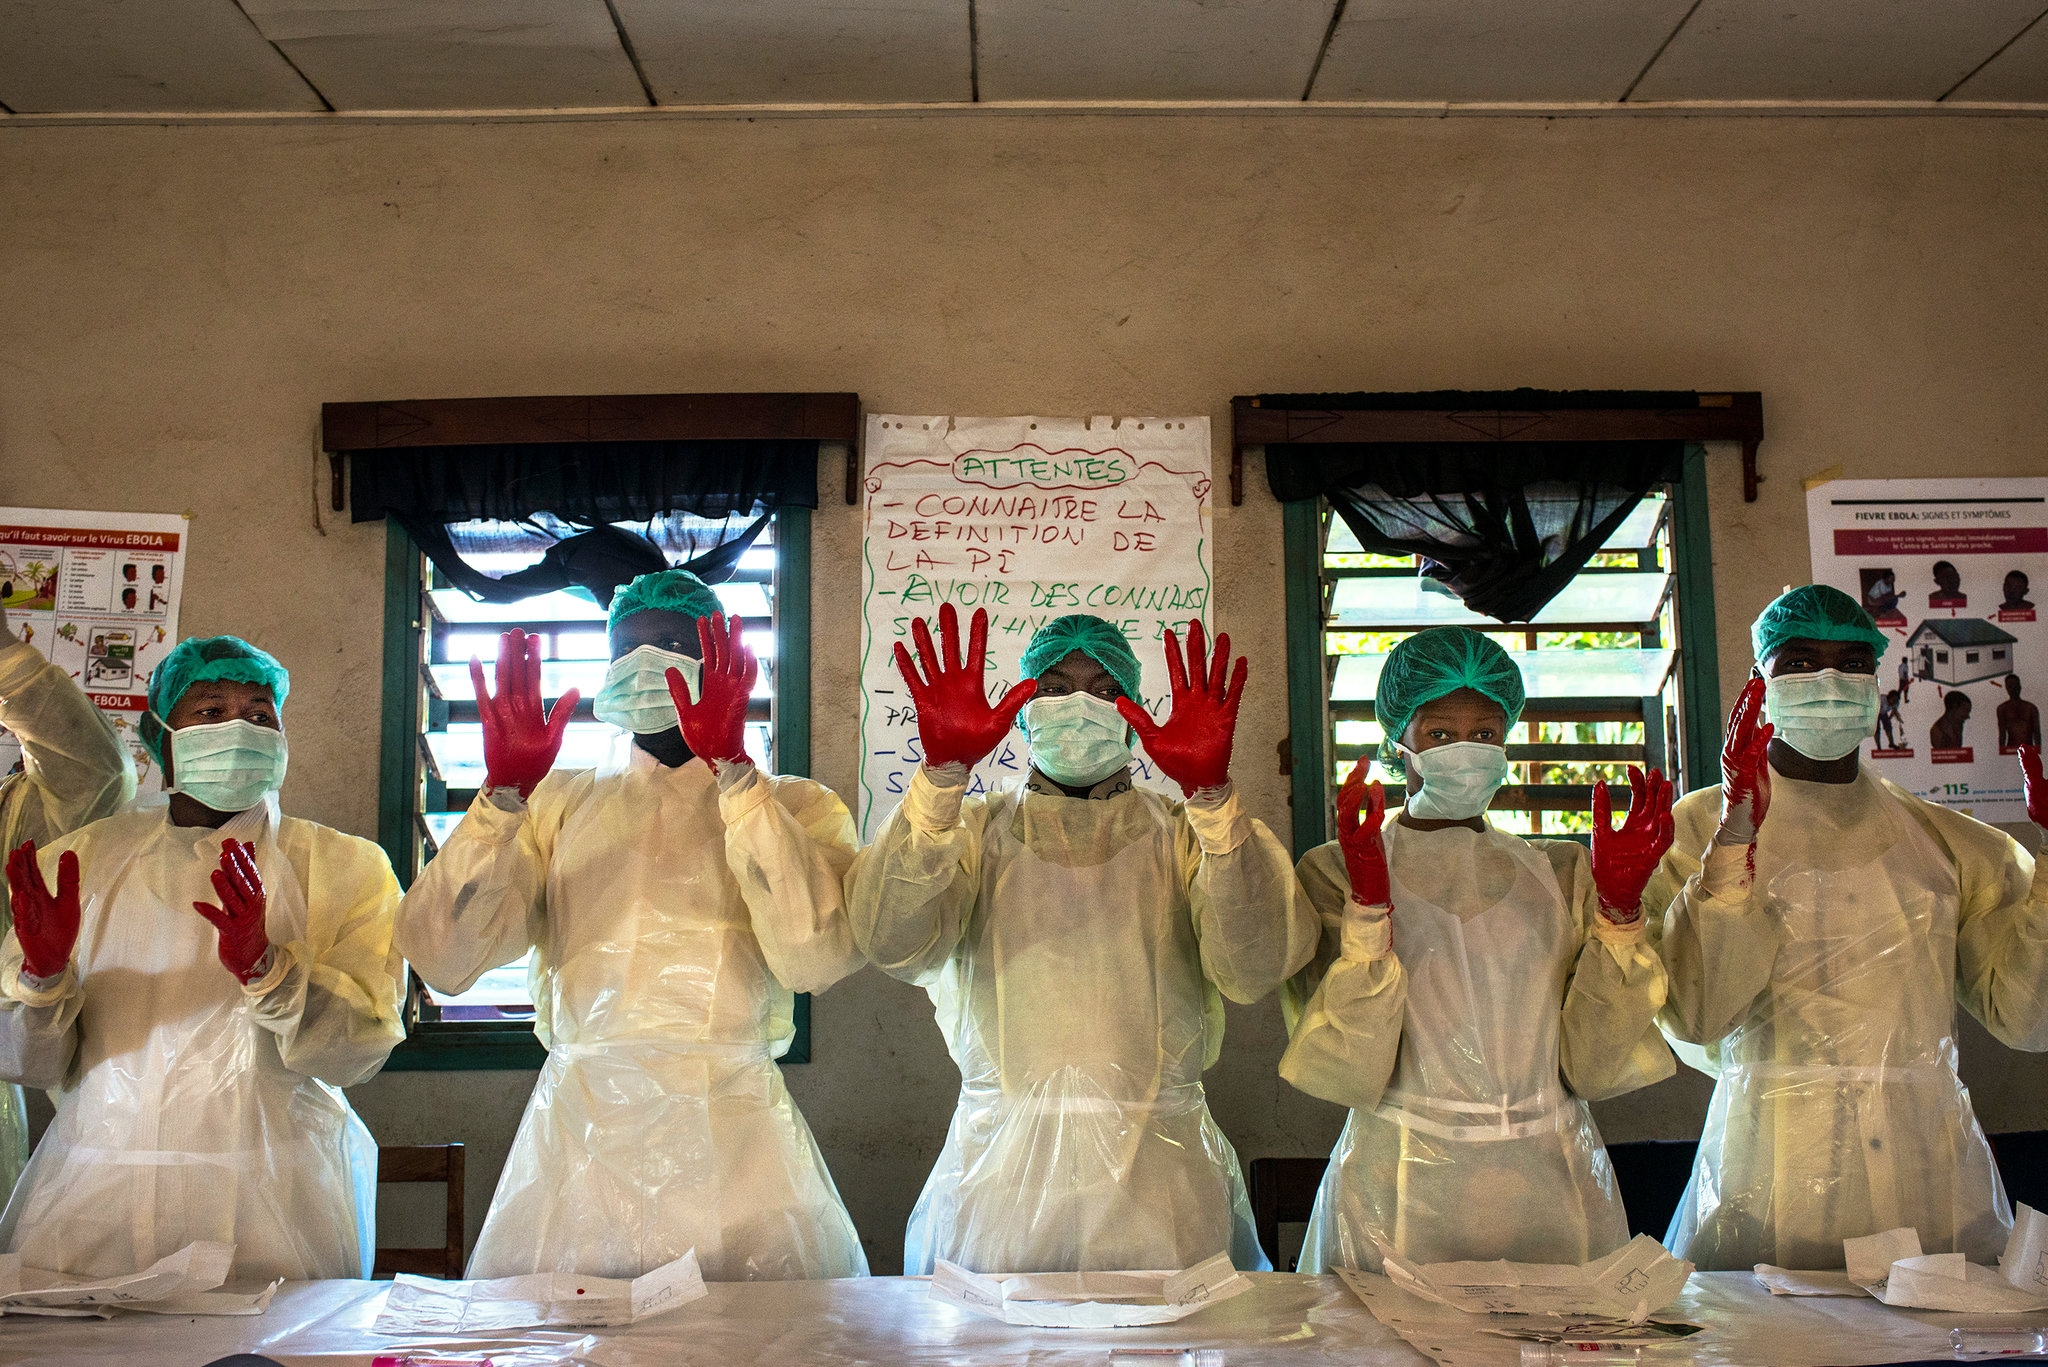 Students at an infection-prevention class showing their results in a hand-washing exercise while wrapped securely in medical robes, masks, and gloves